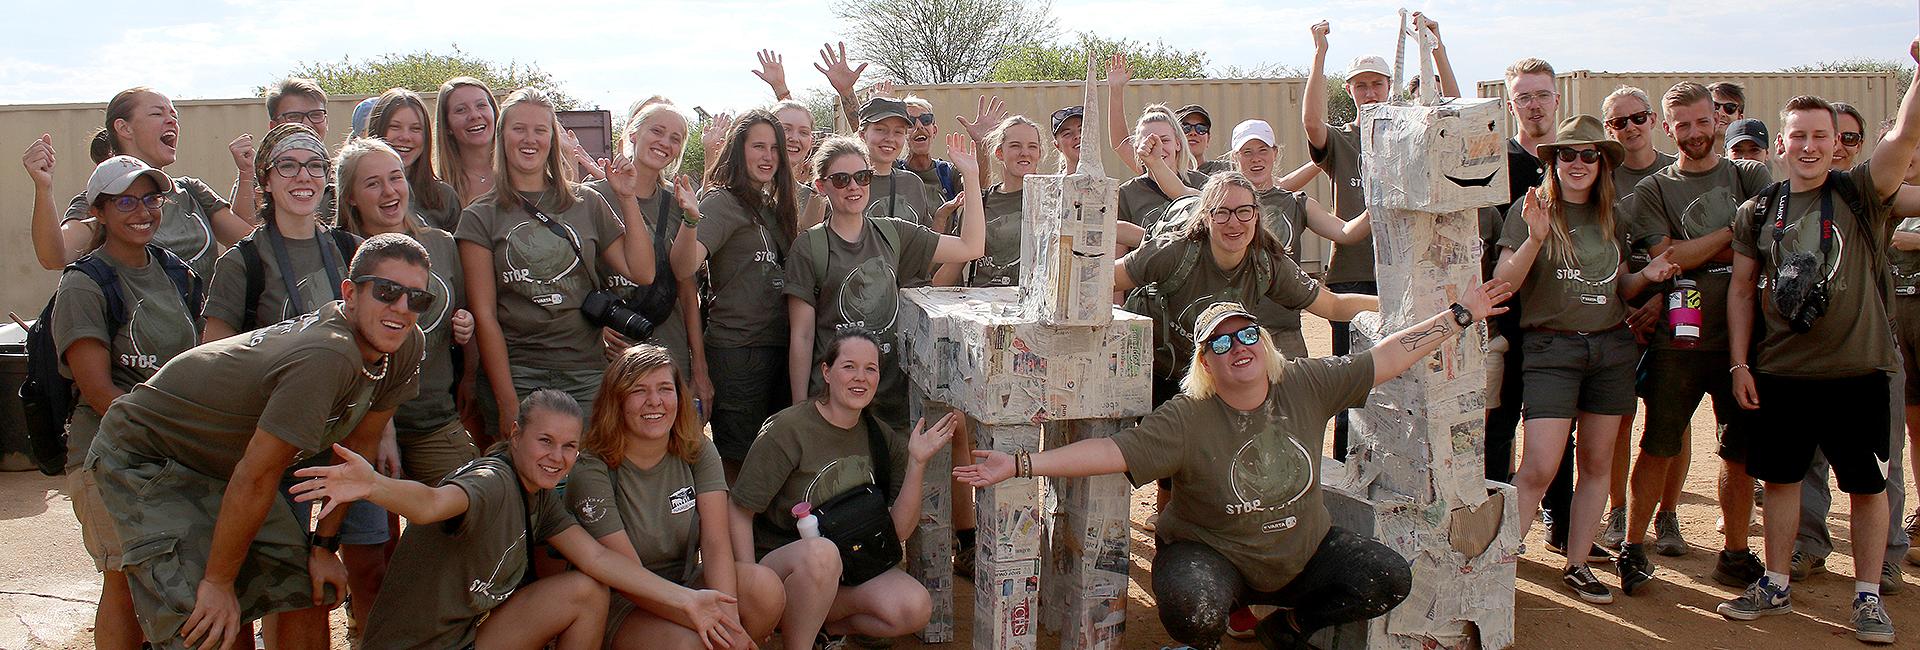 Check Out Doug's Volunteer Review of the Namibia Wildlife Sanctuary 